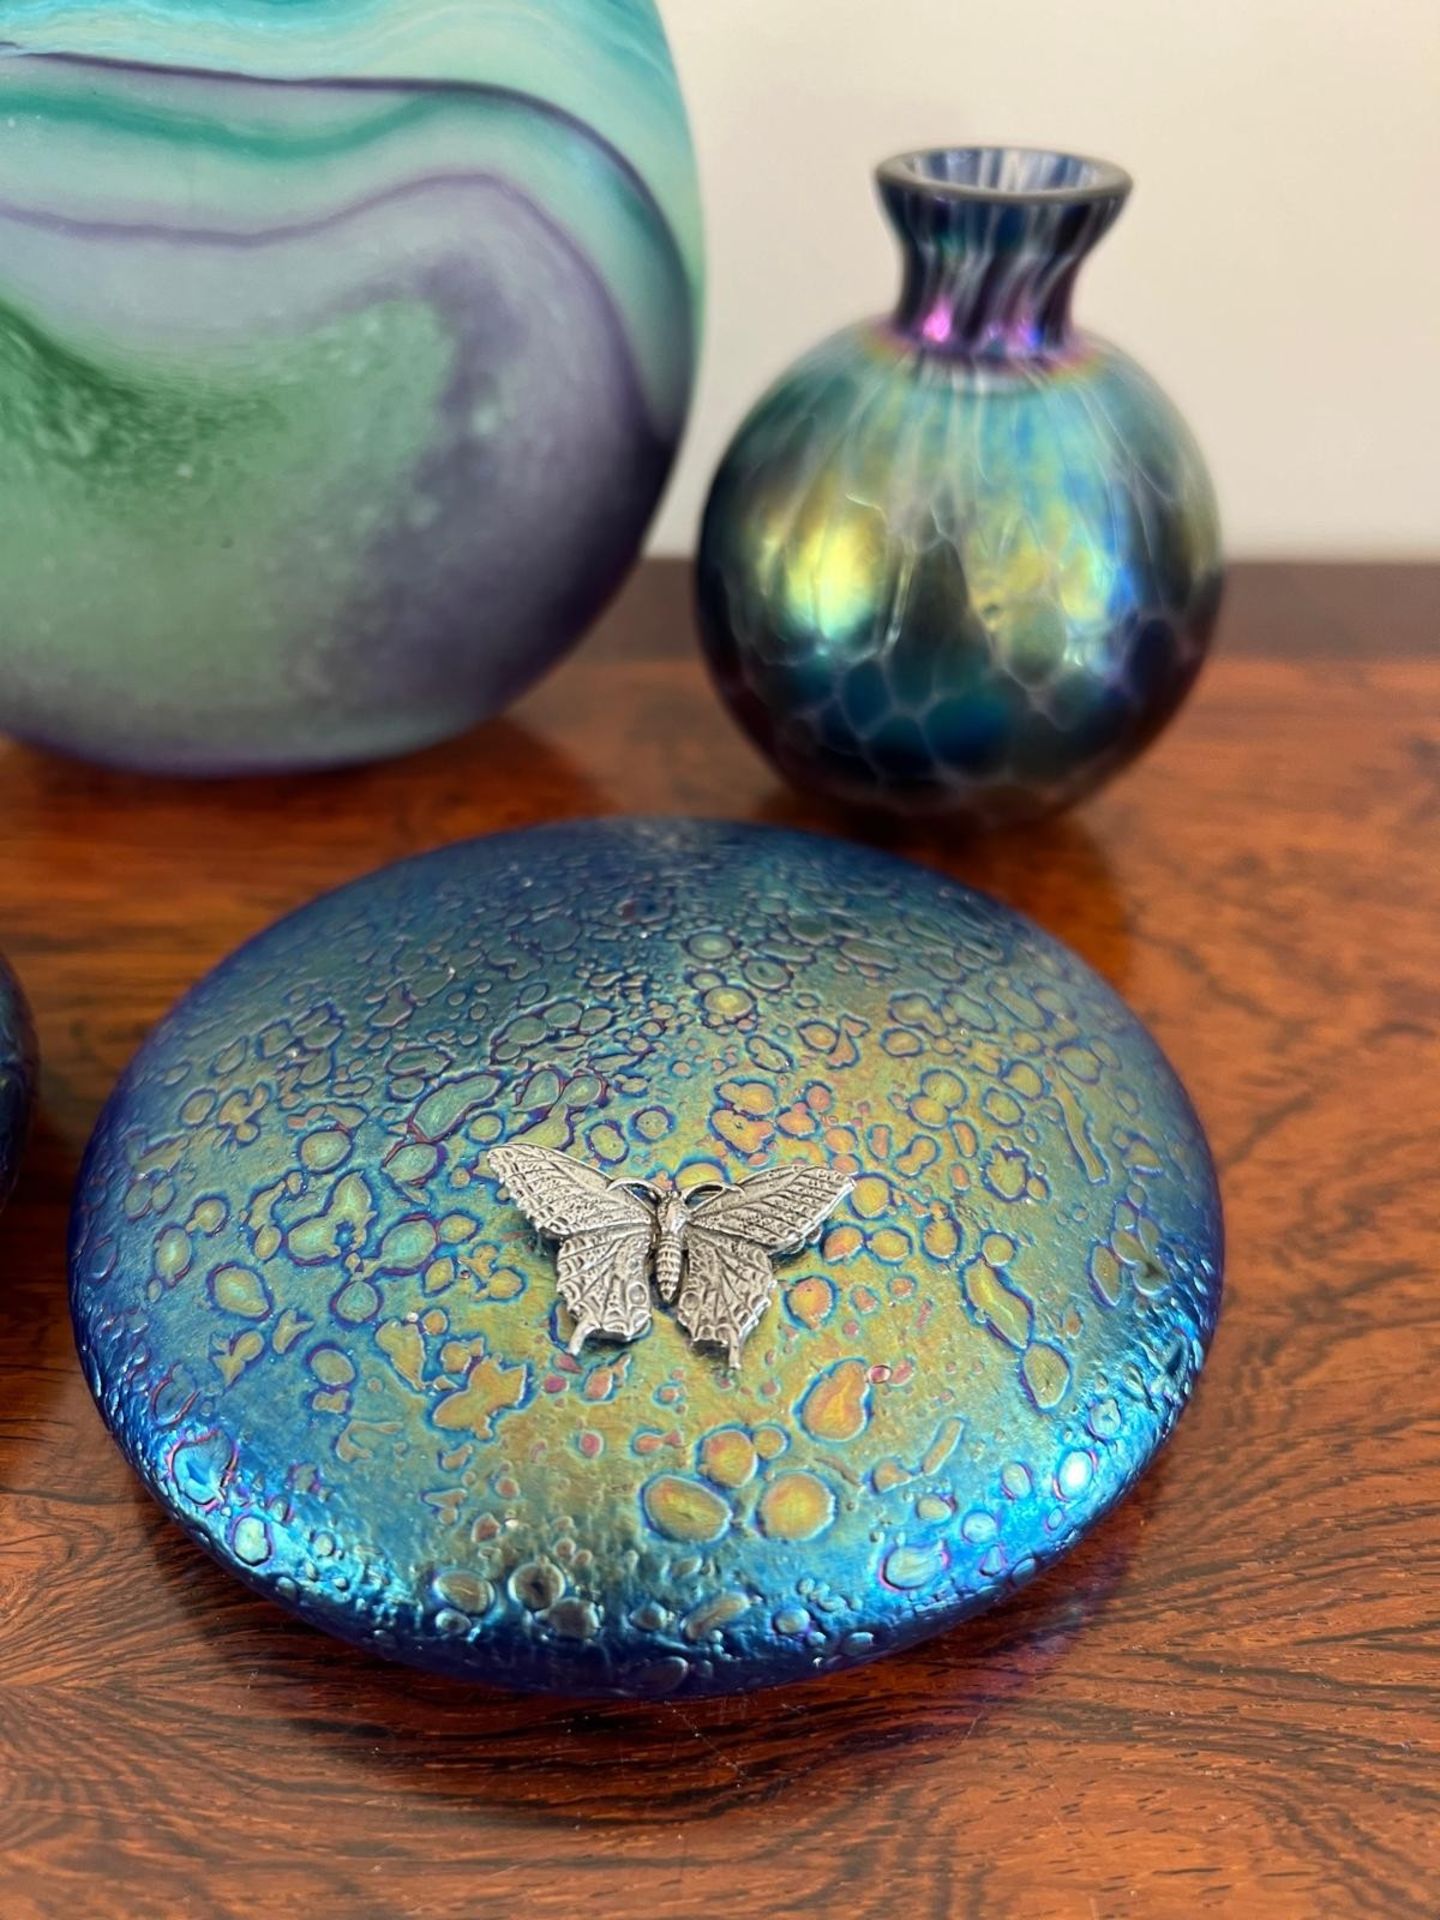 FOUR PIECES OF IRIDESCENT DECORATIVE ART GLASS AND ALSO HAND BLOWN GLASS VASE - Image 3 of 3